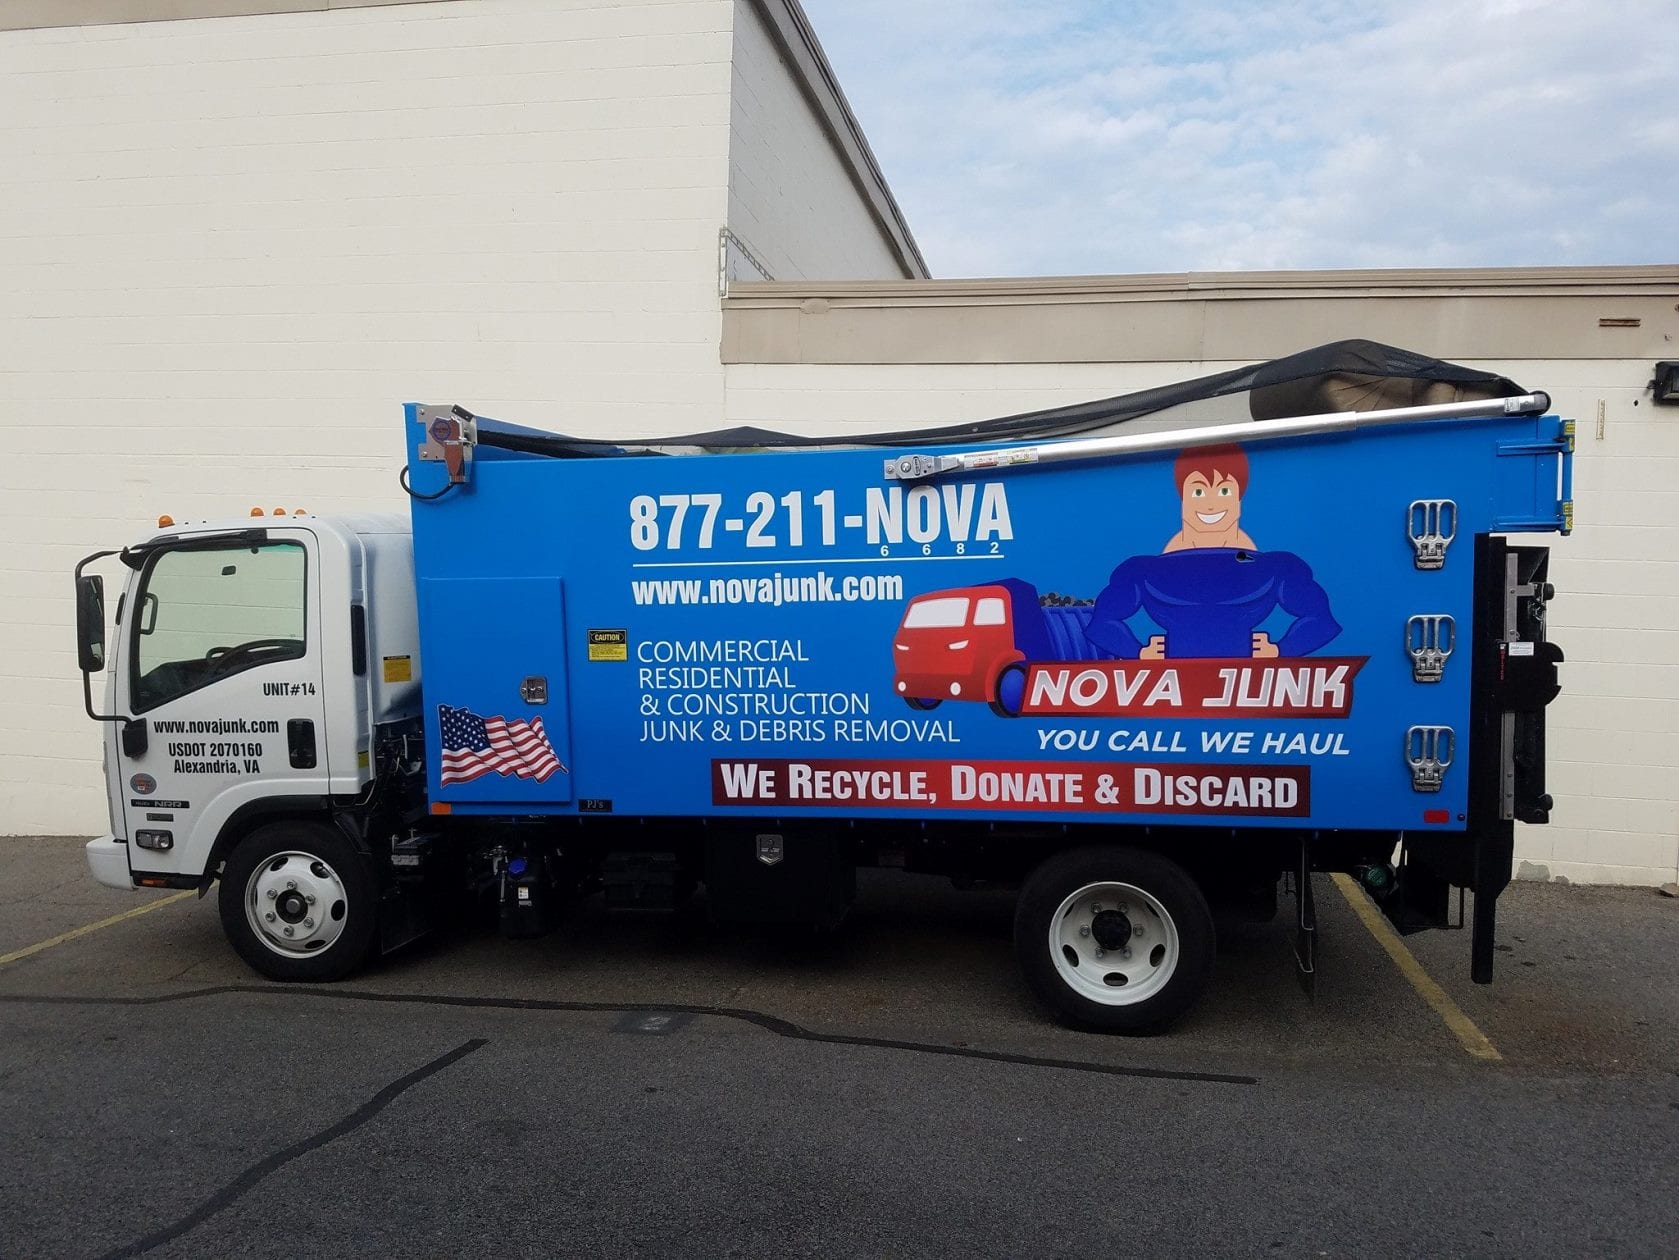 Nova Junk is a junk removal service helping businesses and homes in Reston, Virgninia